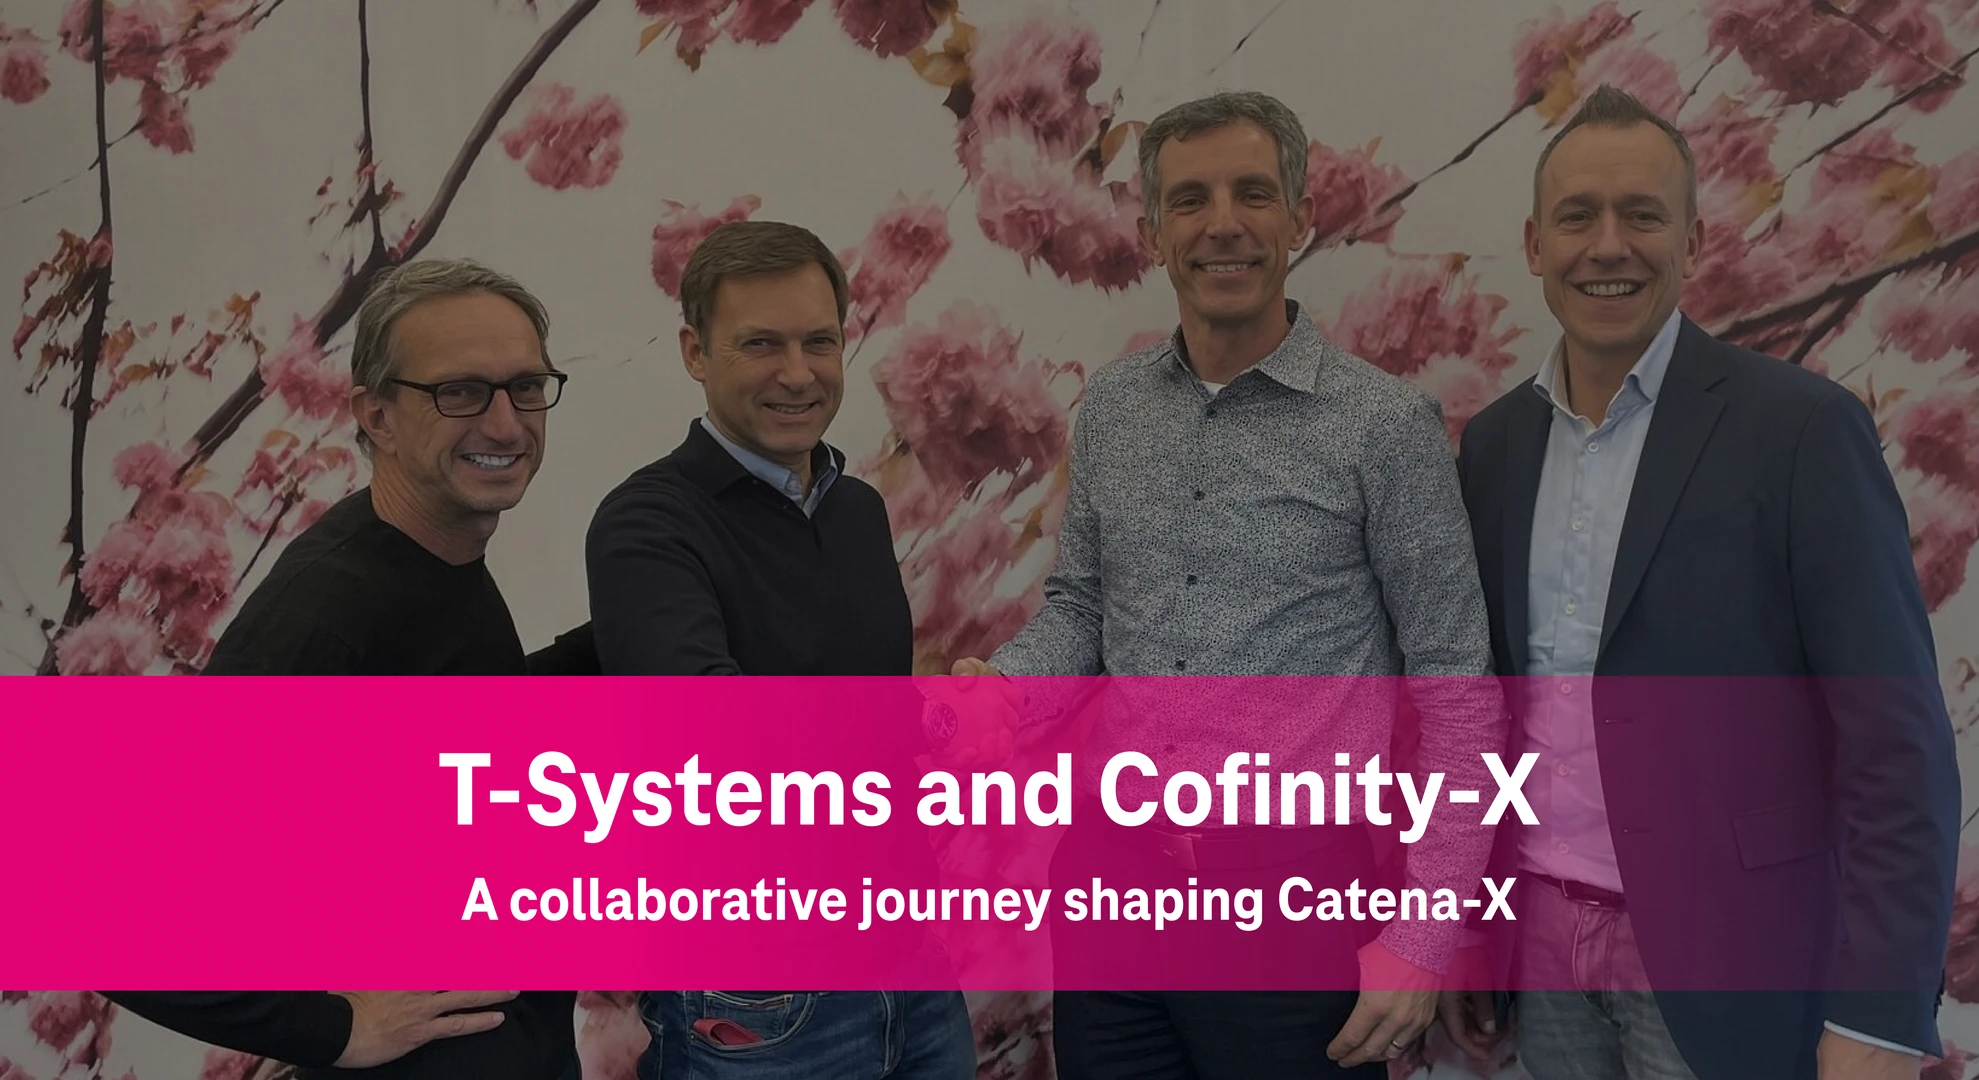 T-Systems and Cofinity-X A collaborative journey shaping Catena-X